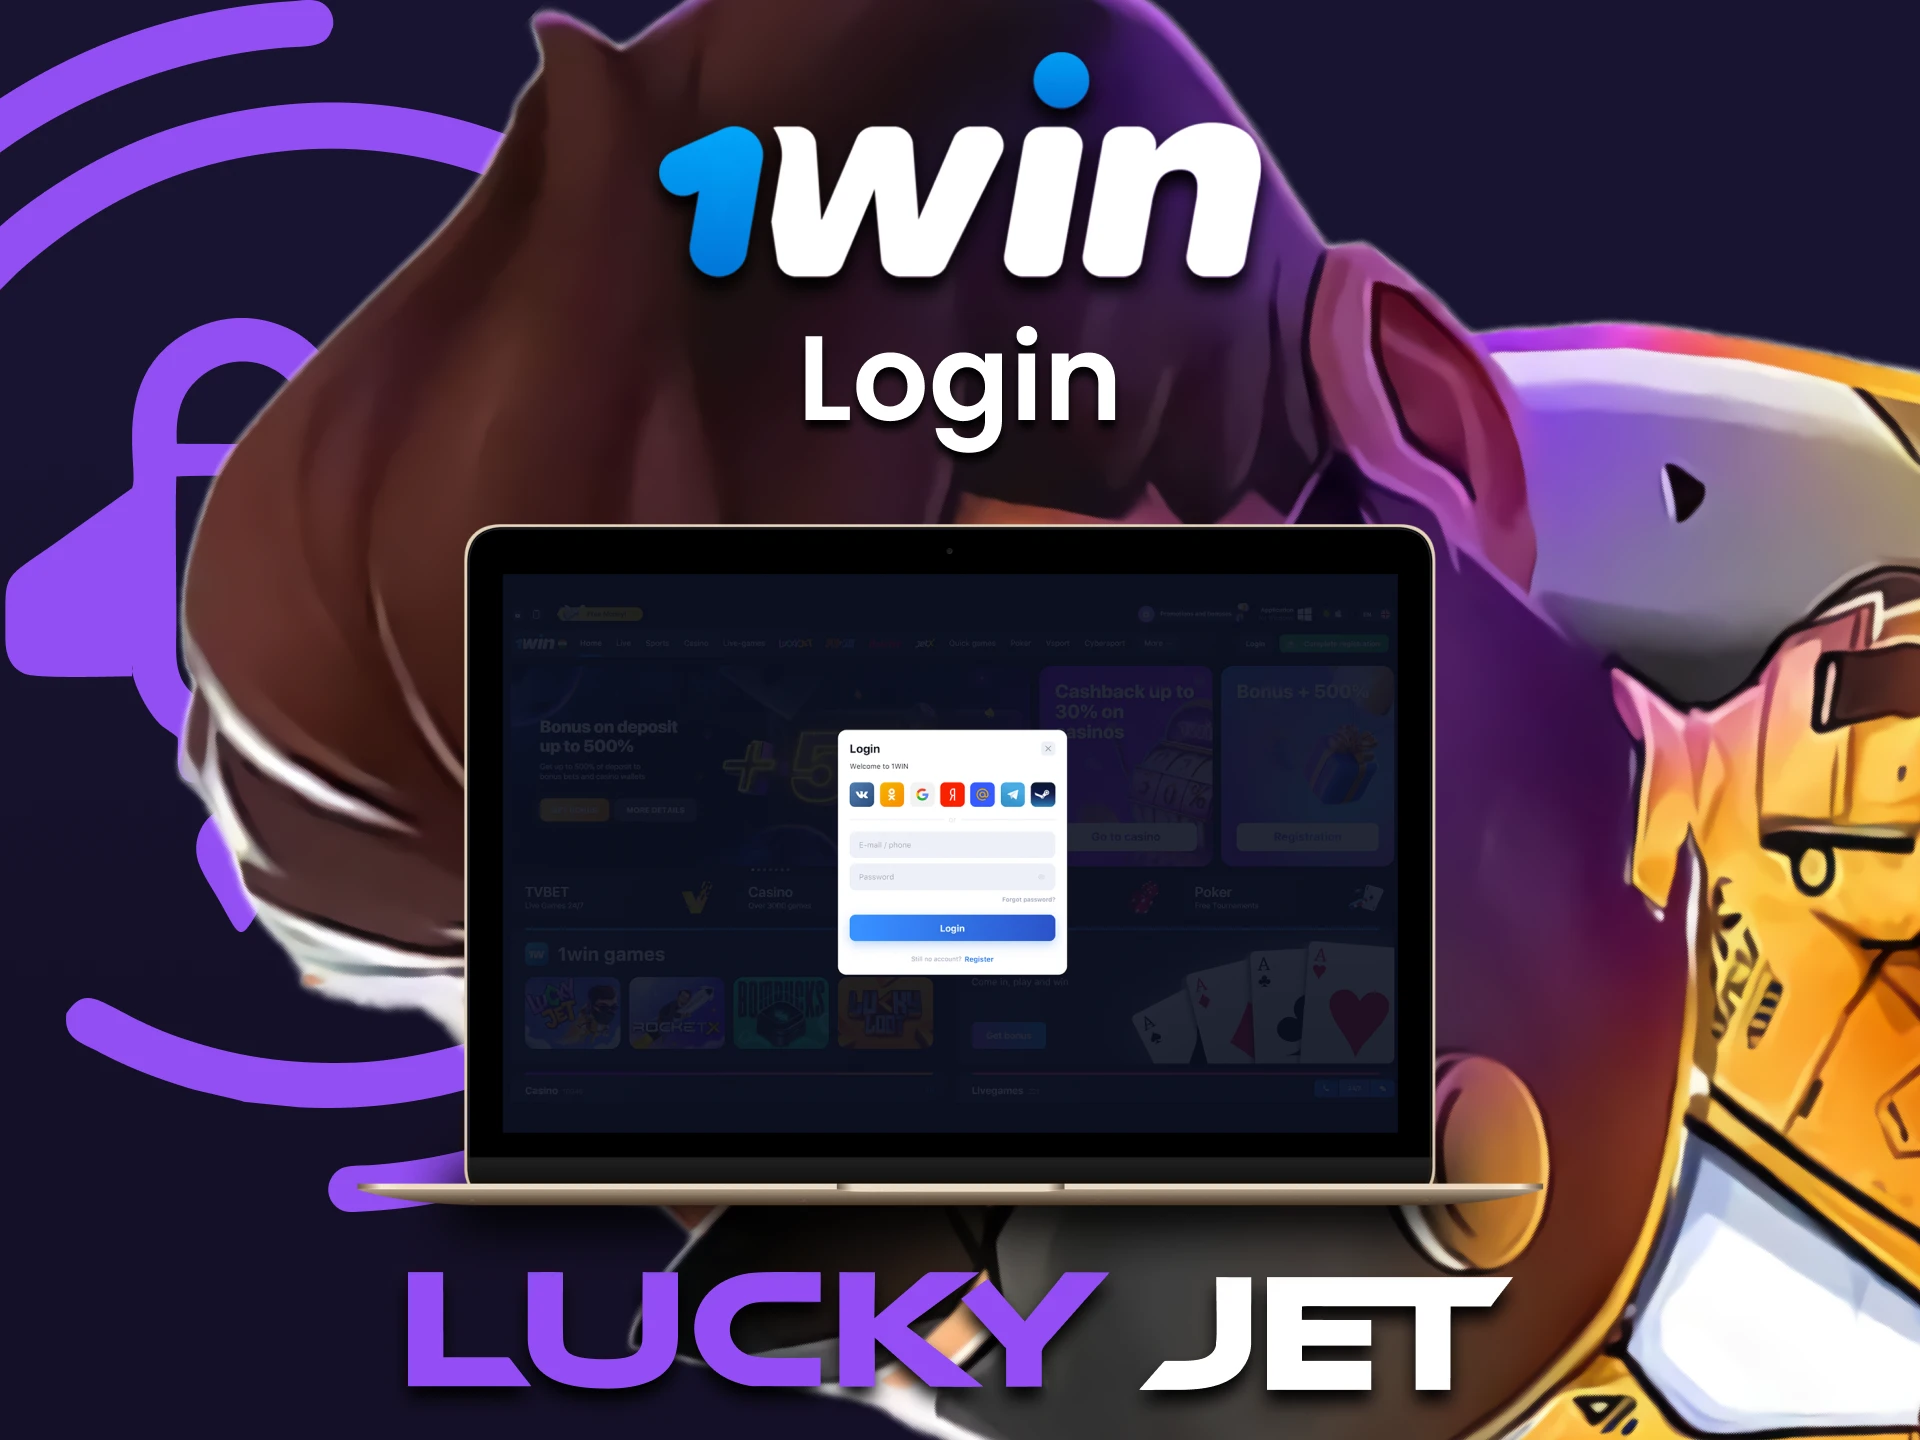 Log in to your personal 1win account to play Lucky Jet.